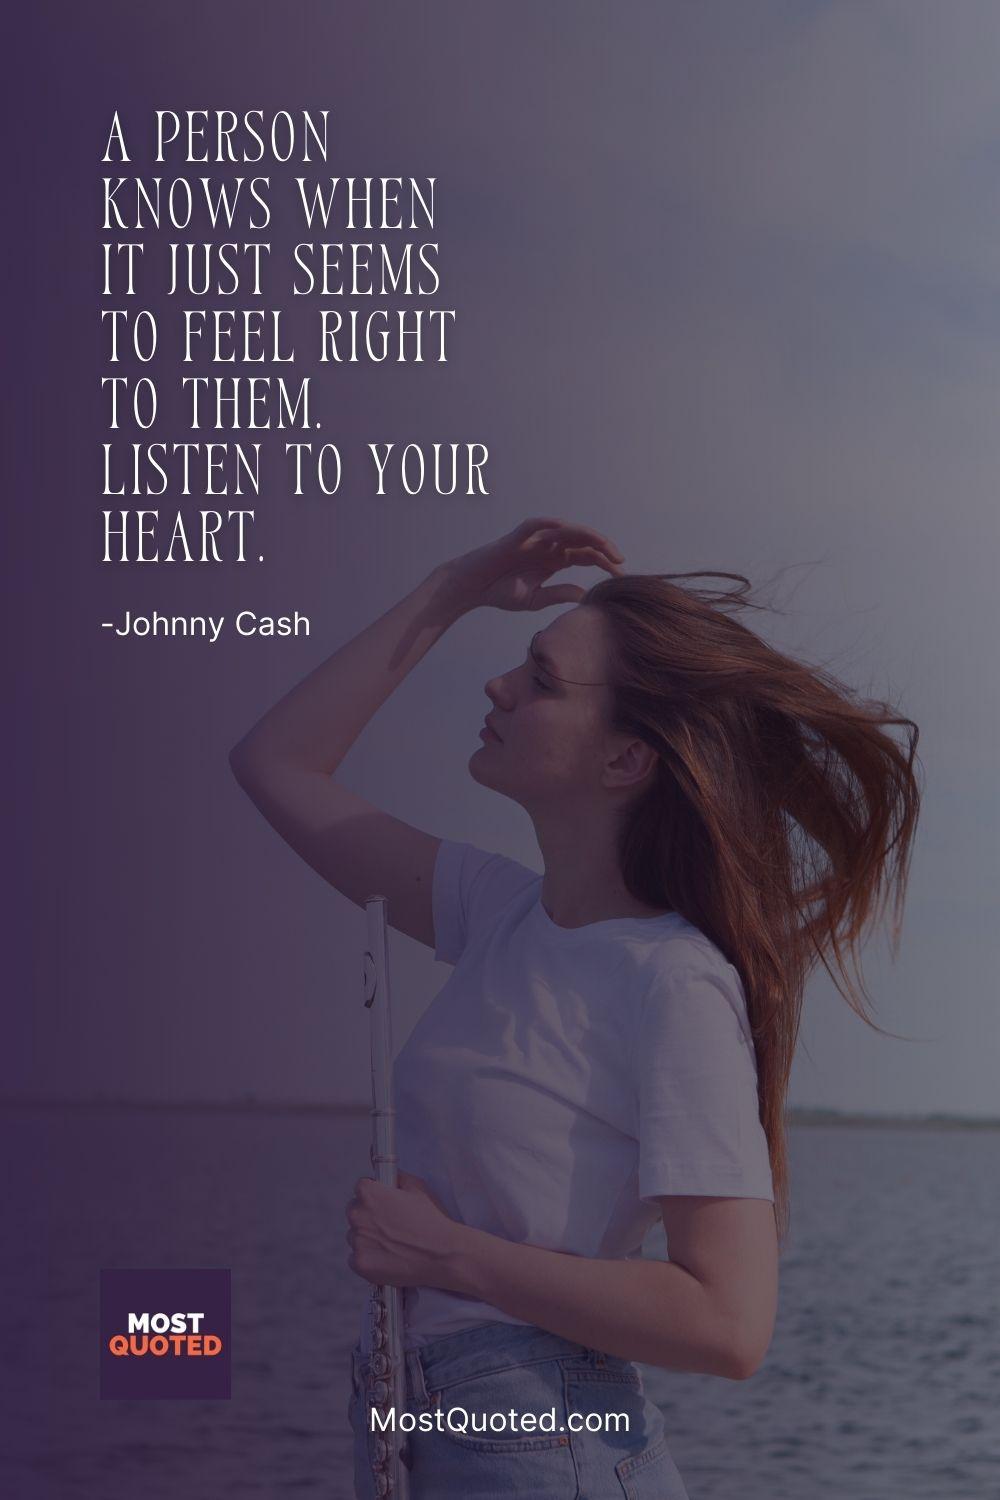 A person knows when it just seems to feel right to them. Listen to your heart. - Johnny Cash